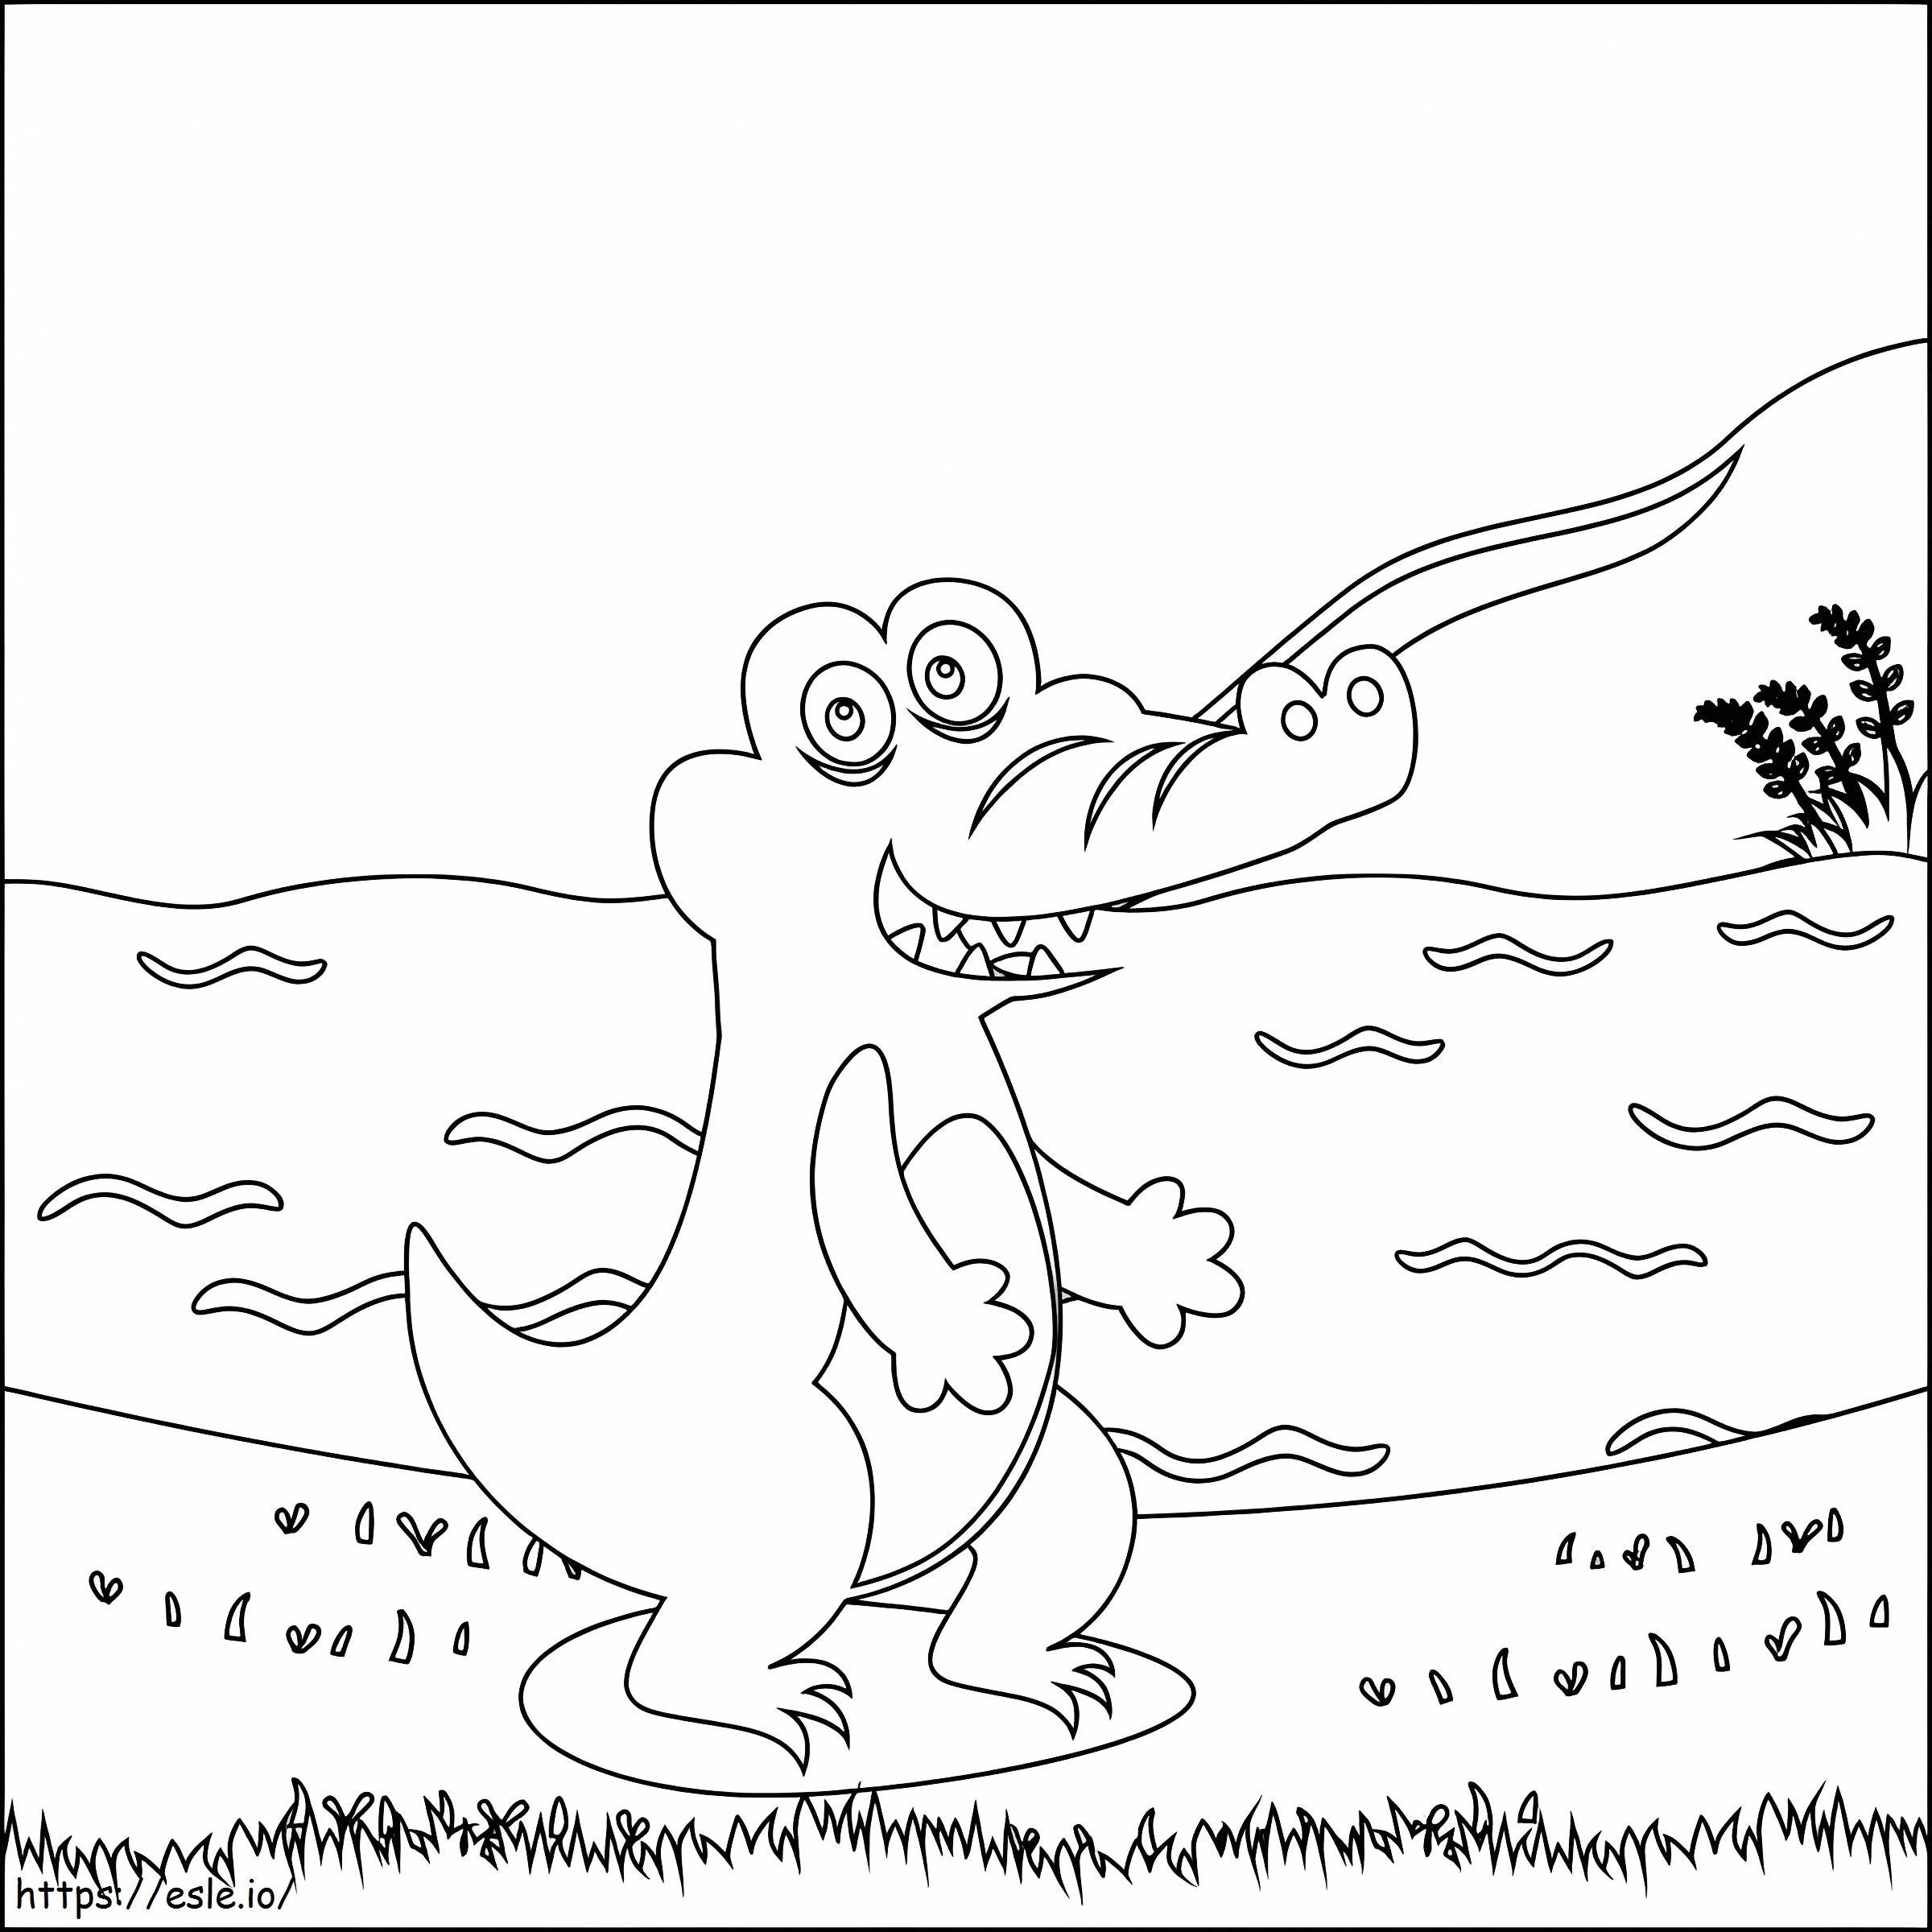 Crocodile Standing On The Grass coloring page